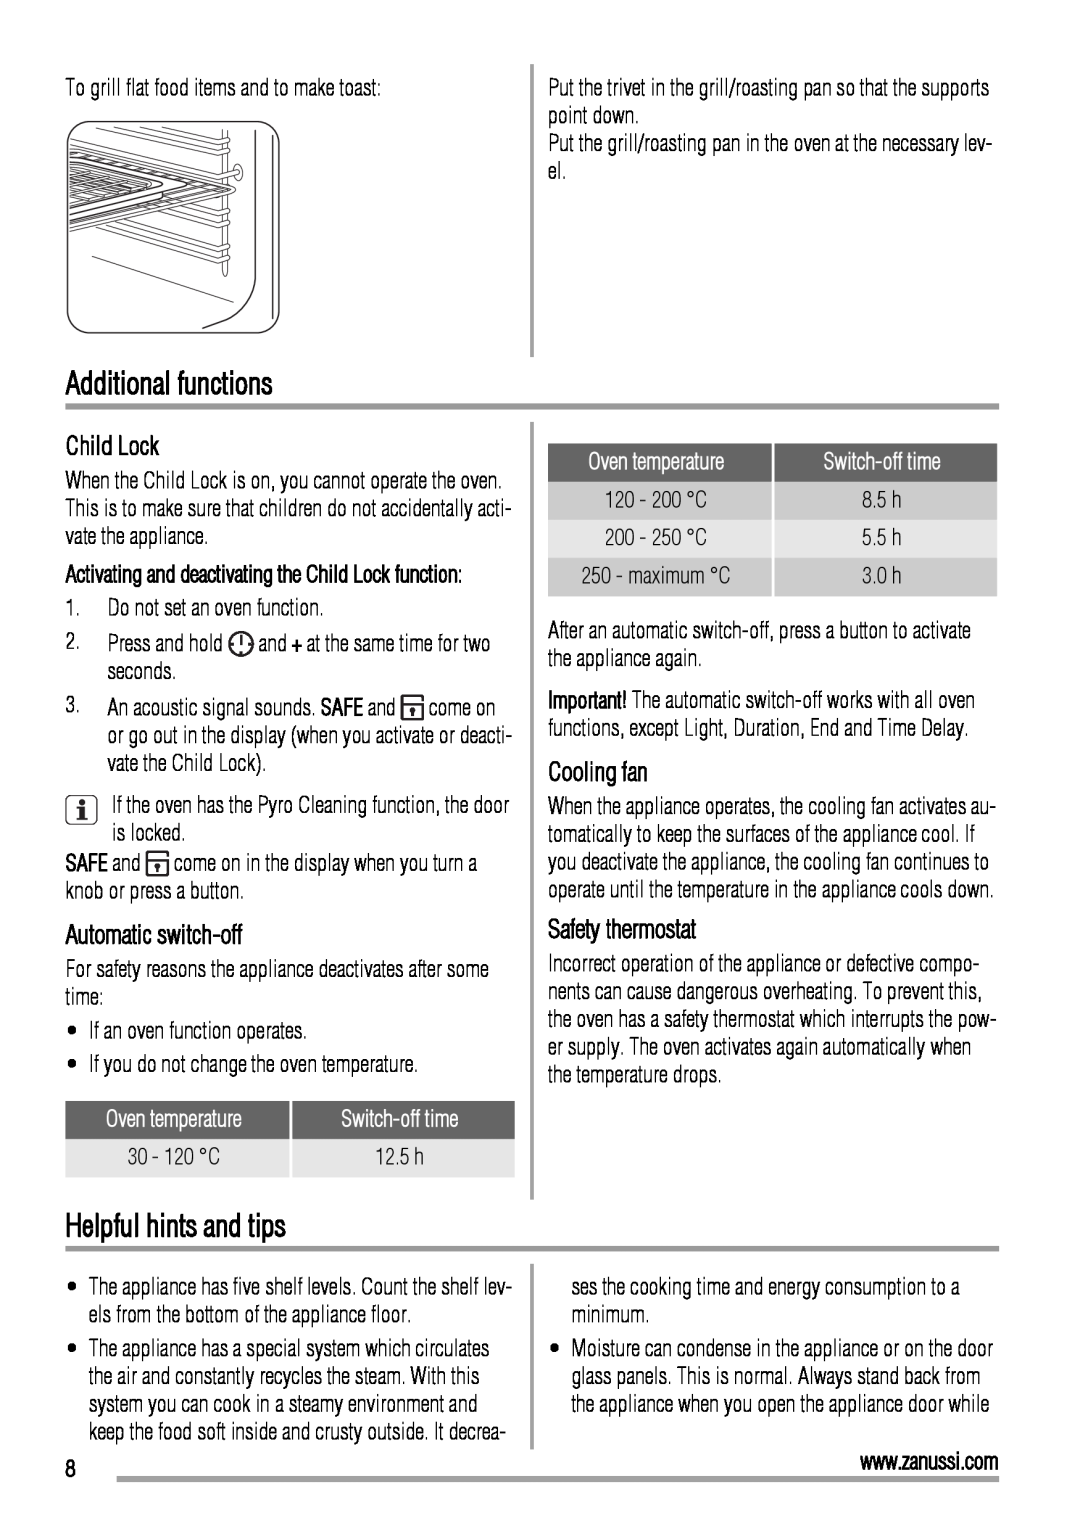 Zanussi ZOP37902 user manual Additional functions, Helpful hints and tips, Child Lock, Automatic switch-off, Cooling fan 